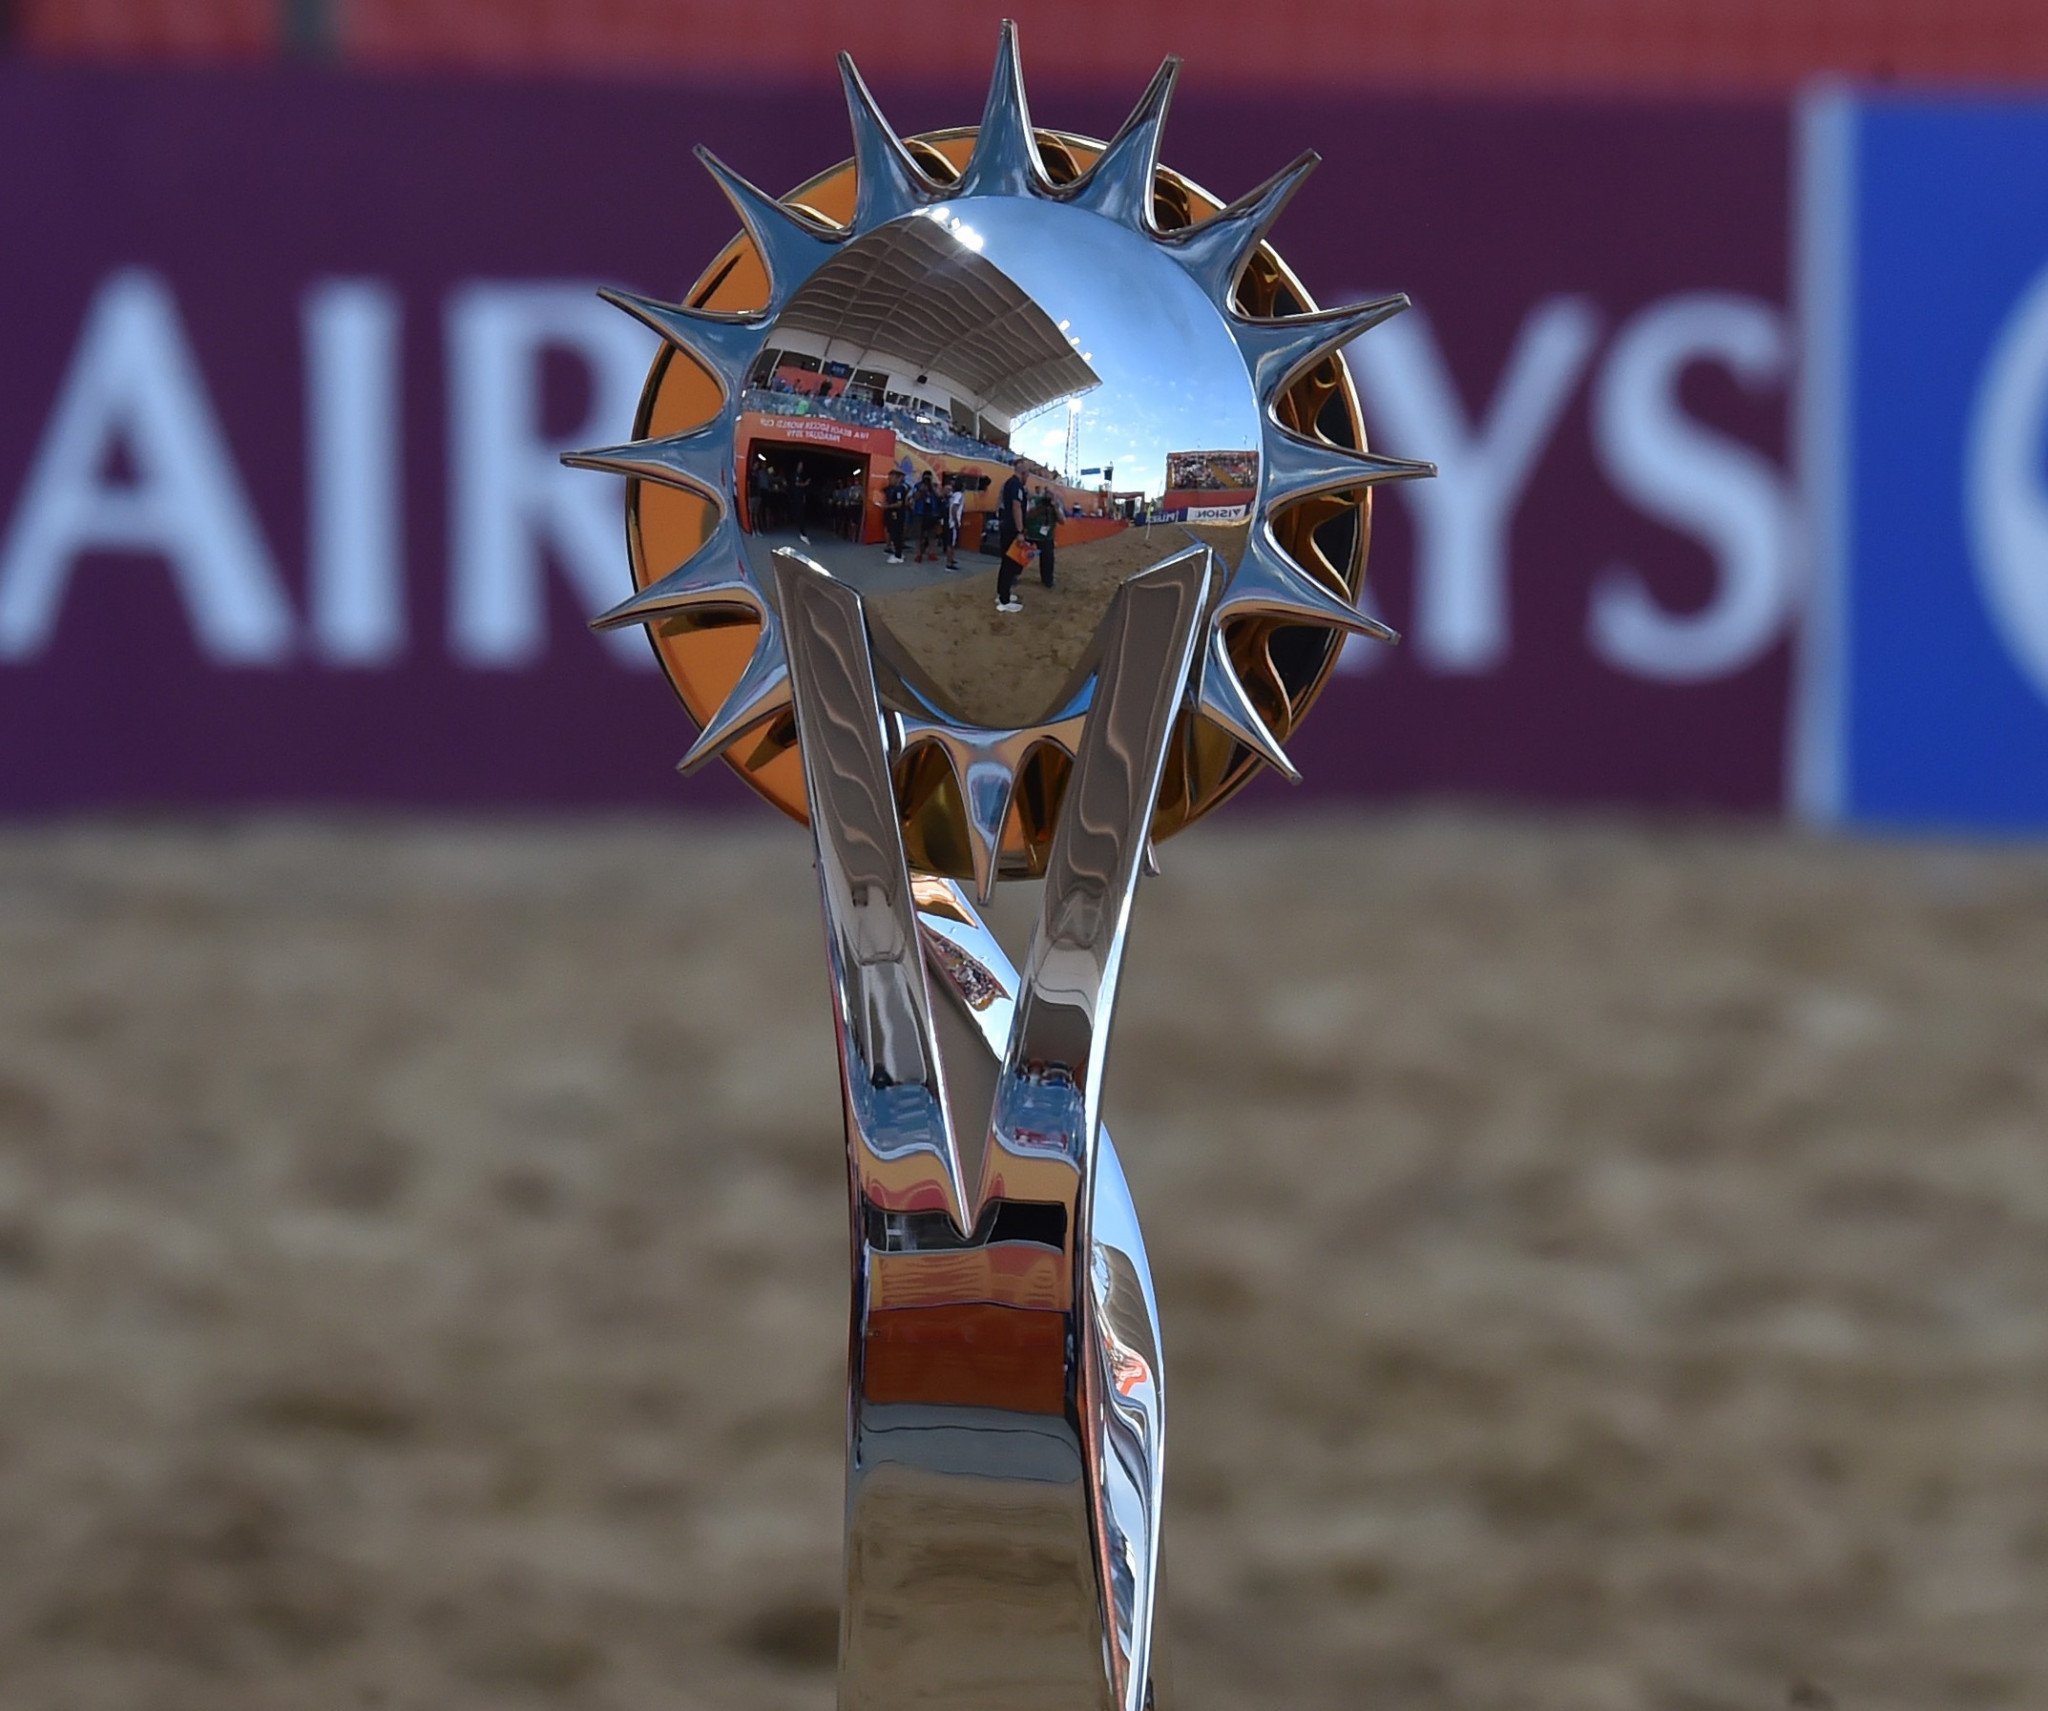 US and El Salvador qualify for FIFA Beach Soccer World Cup